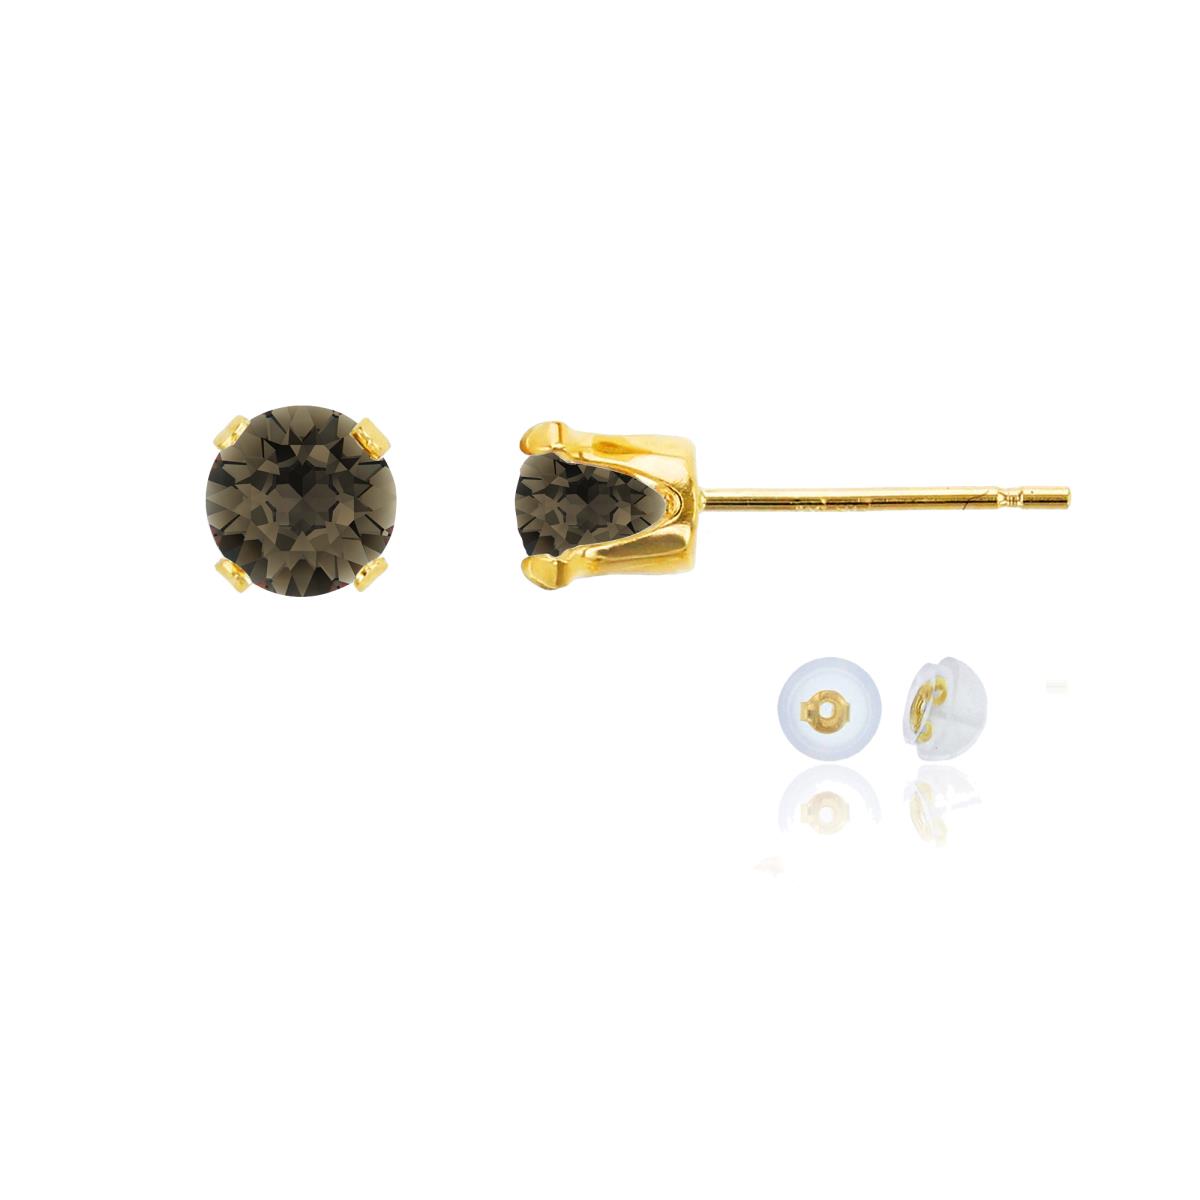 10K Yellow Gold 5mm Round Smokey Quartz Stud Earring with Silicone Back